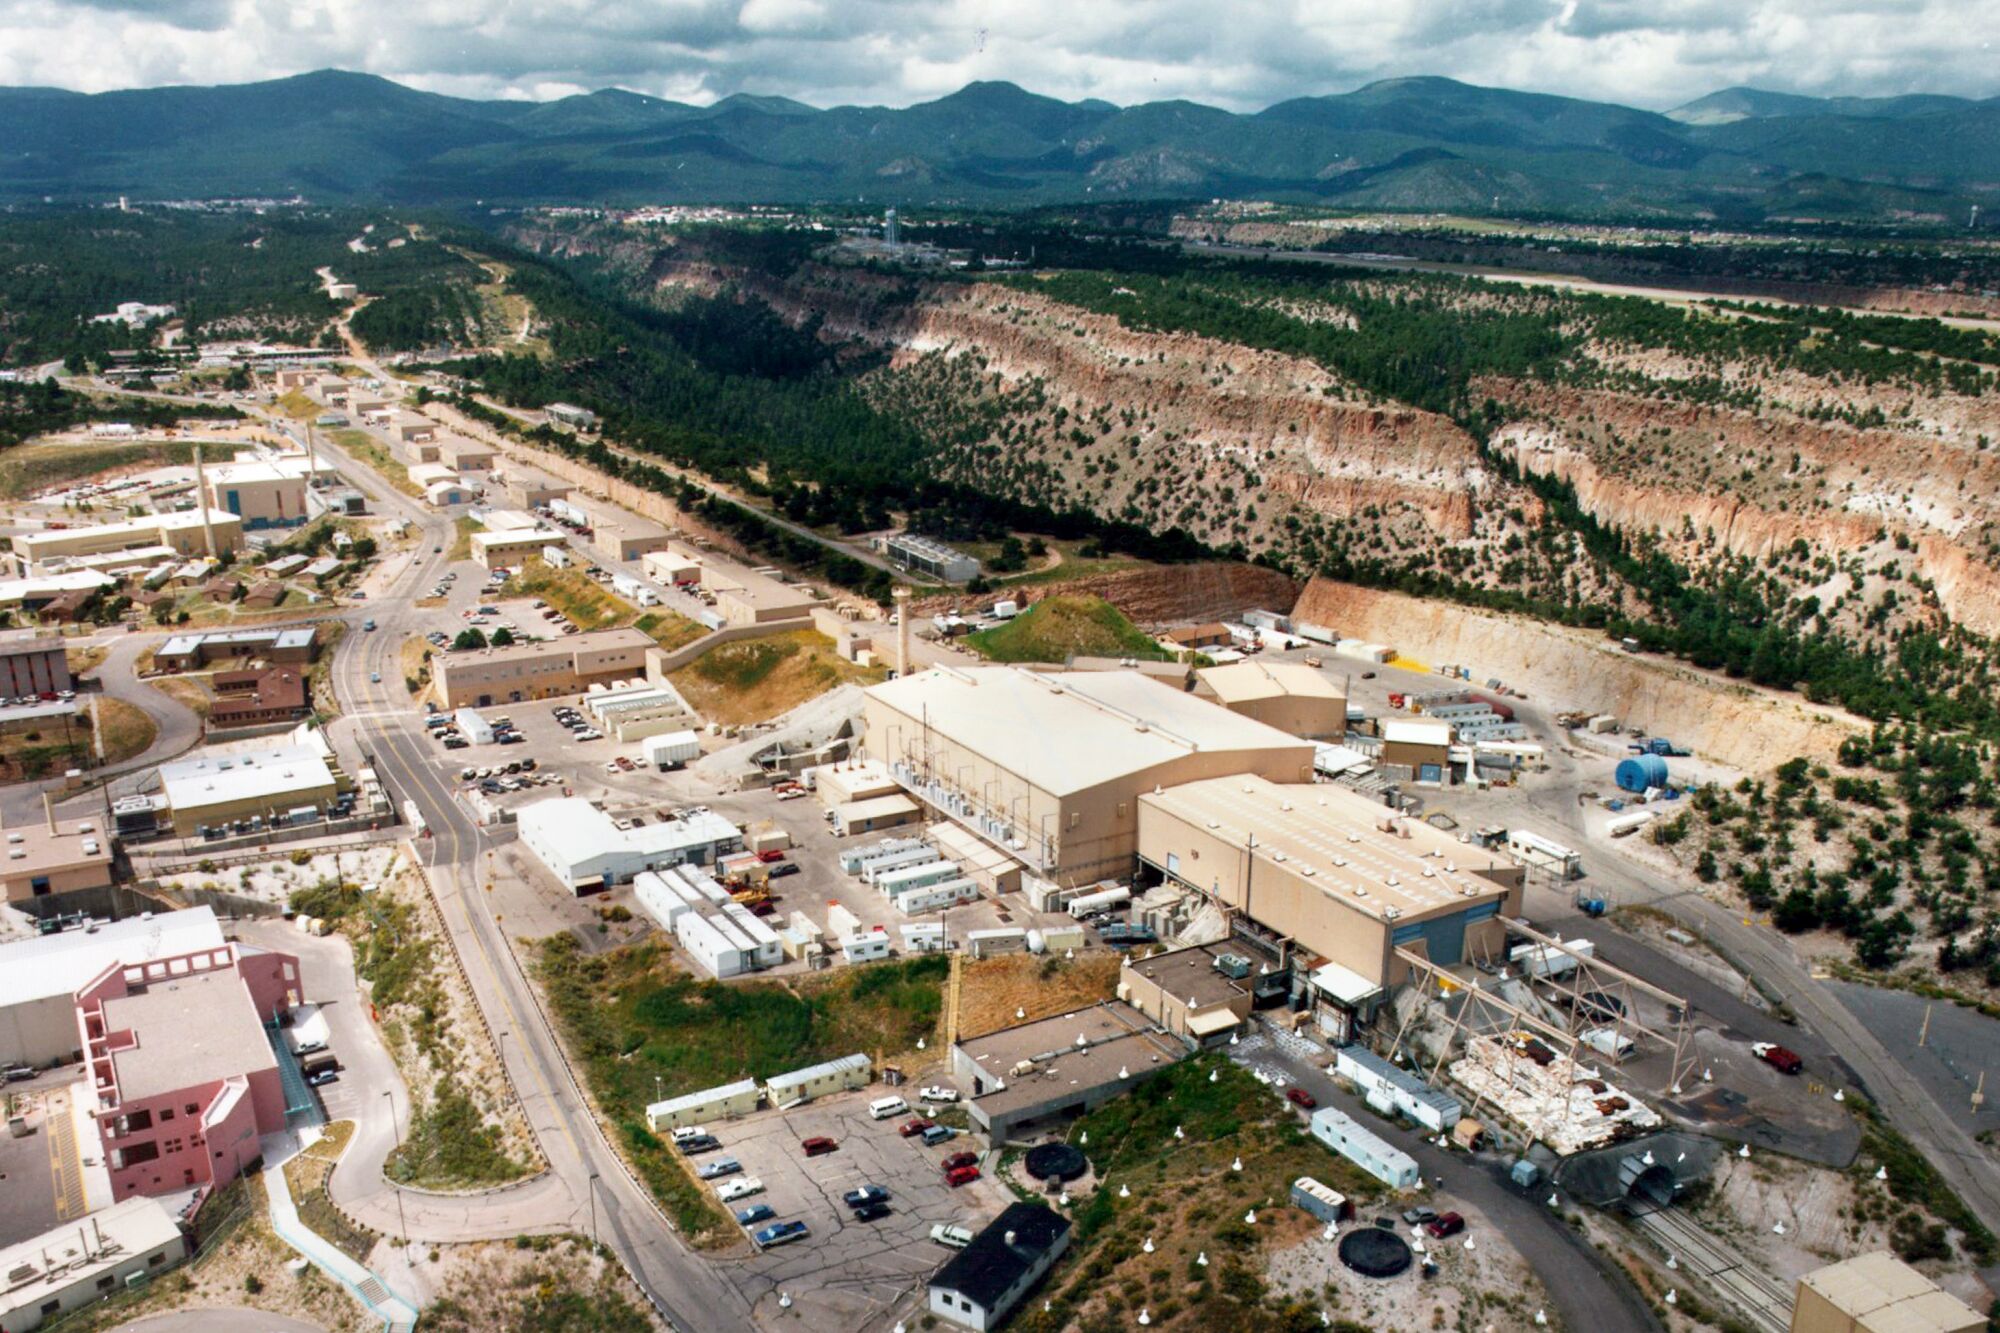 An aerial view of buildings and cars next to forested mountains on the horizon.